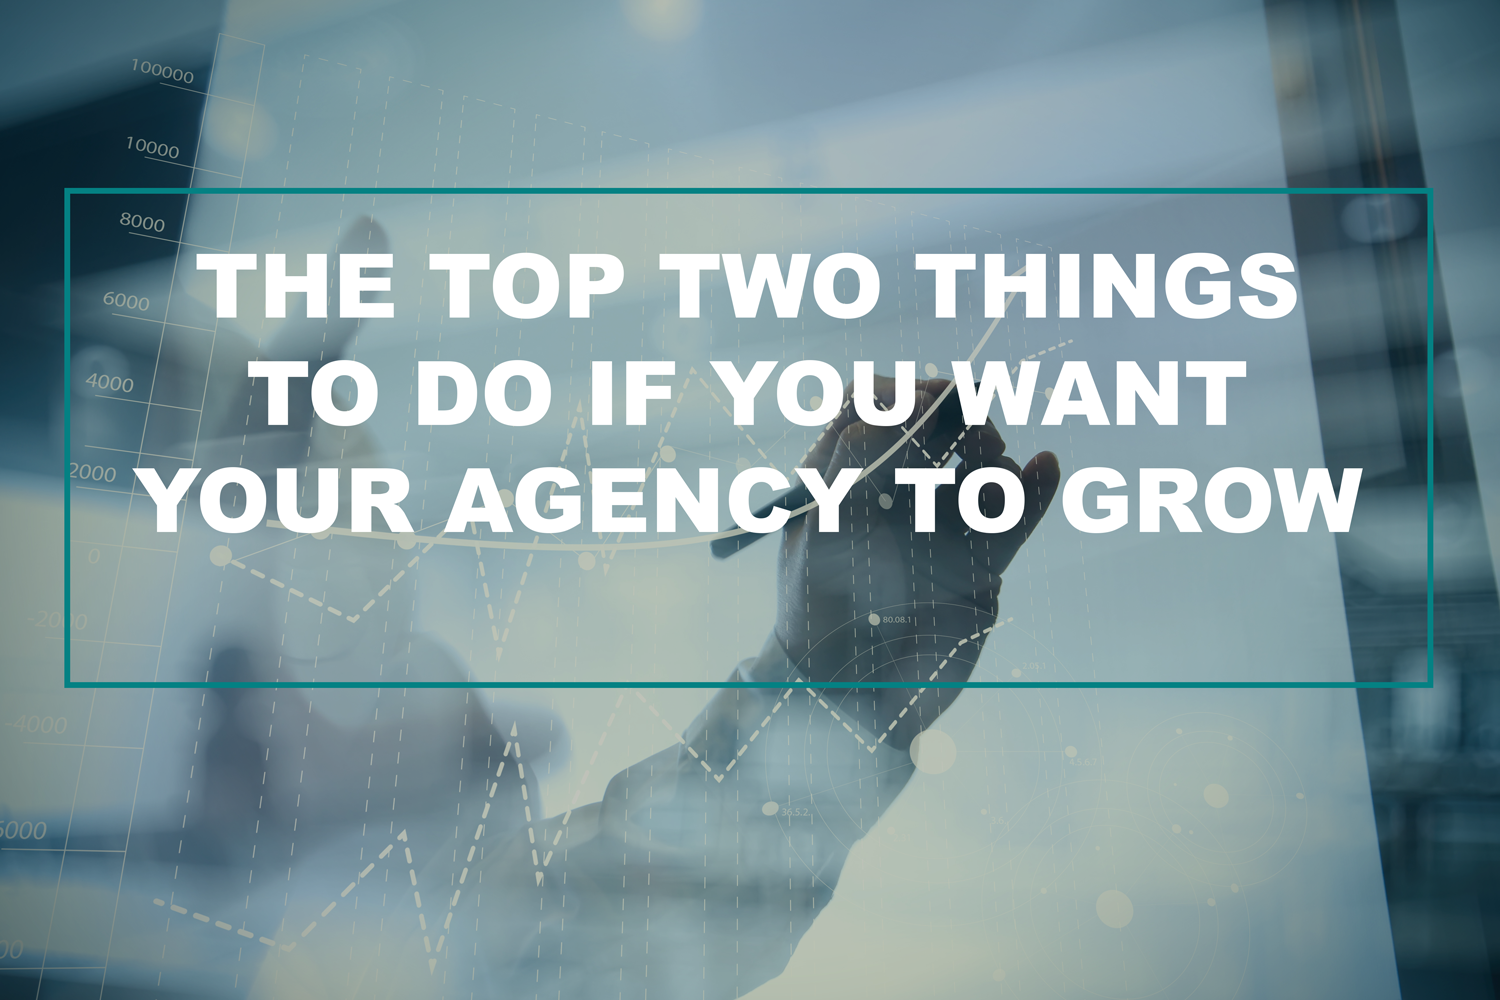 The Top Two Things To Do If You Want Your Agency To Grow